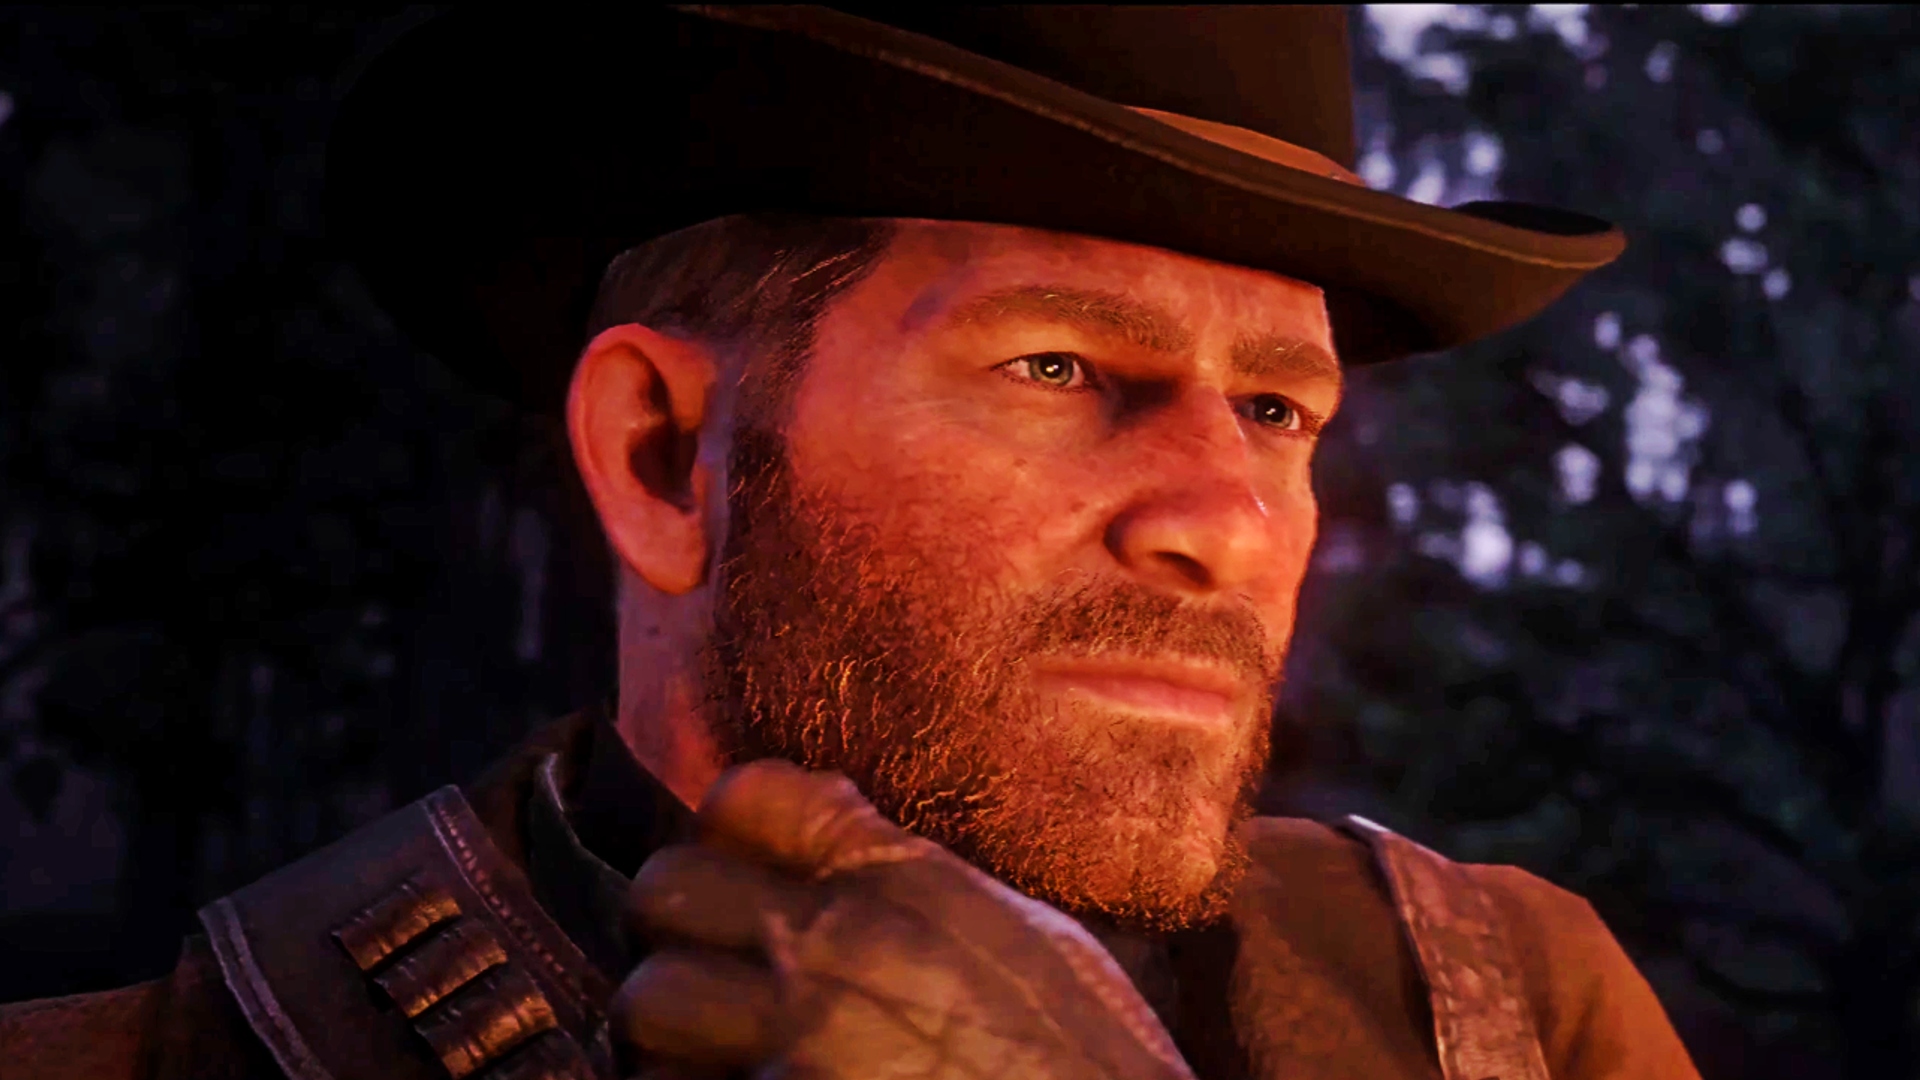 Red Dead Redemption 2 actor confirms new role as 